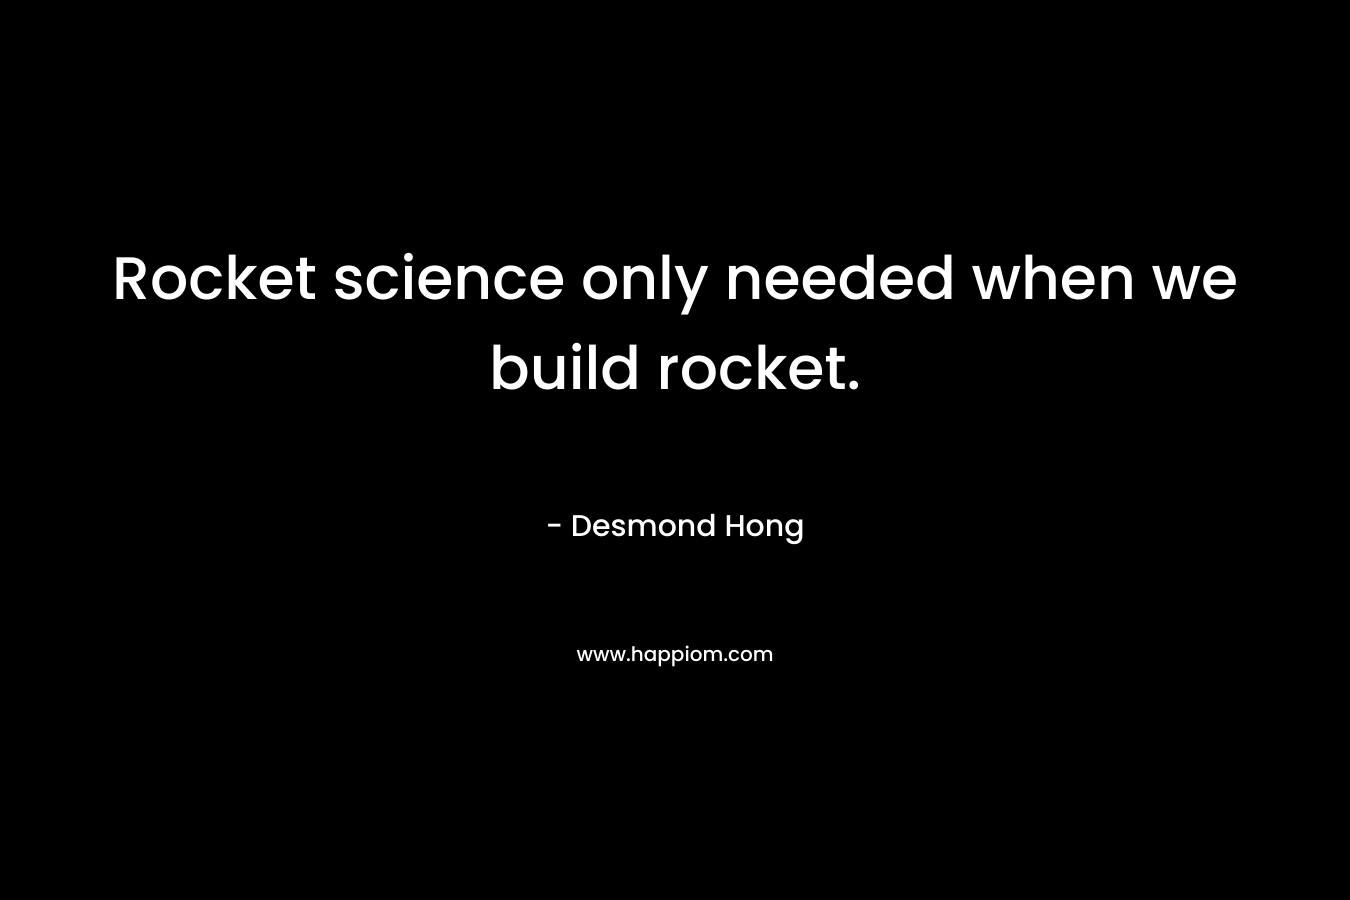 Rocket science only needed when we build rocket.